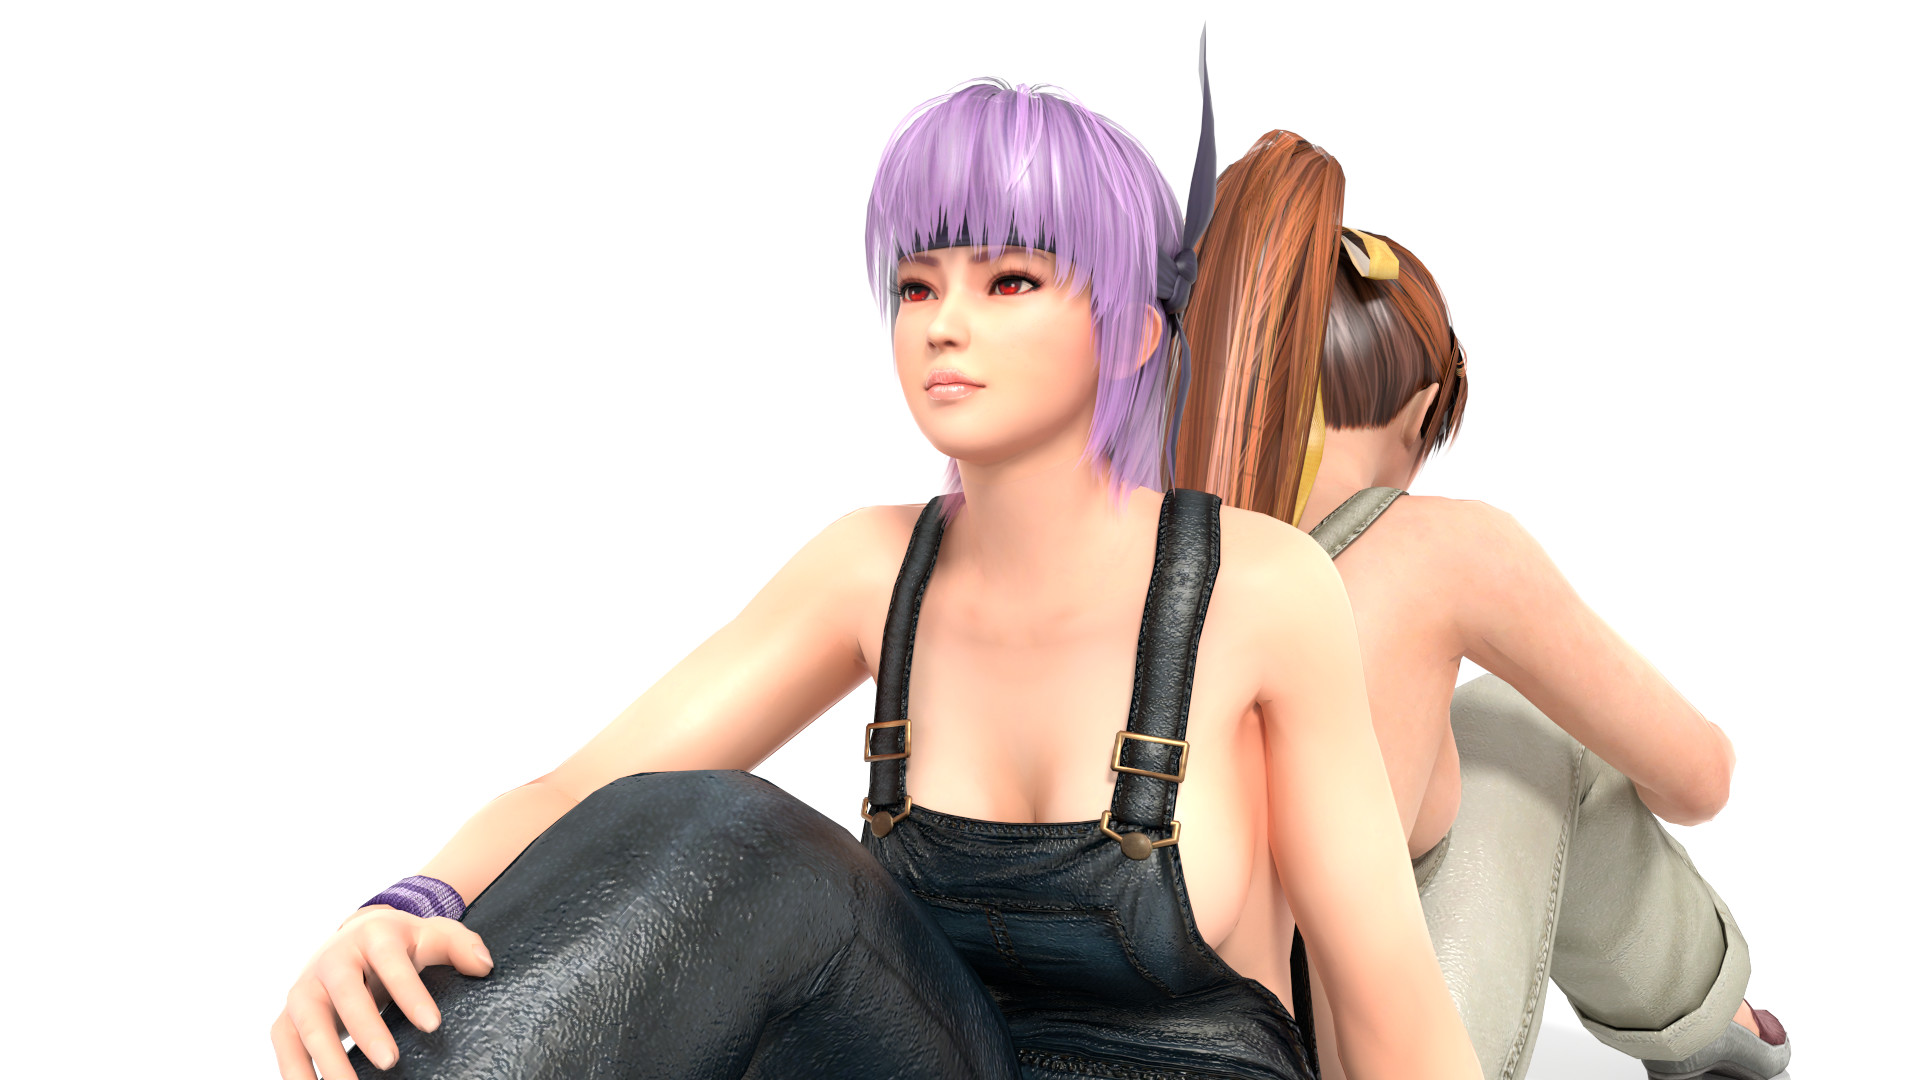 1920x1080 1920x1200 Dead or Alive 5 Last Round Wallpapers Ayane